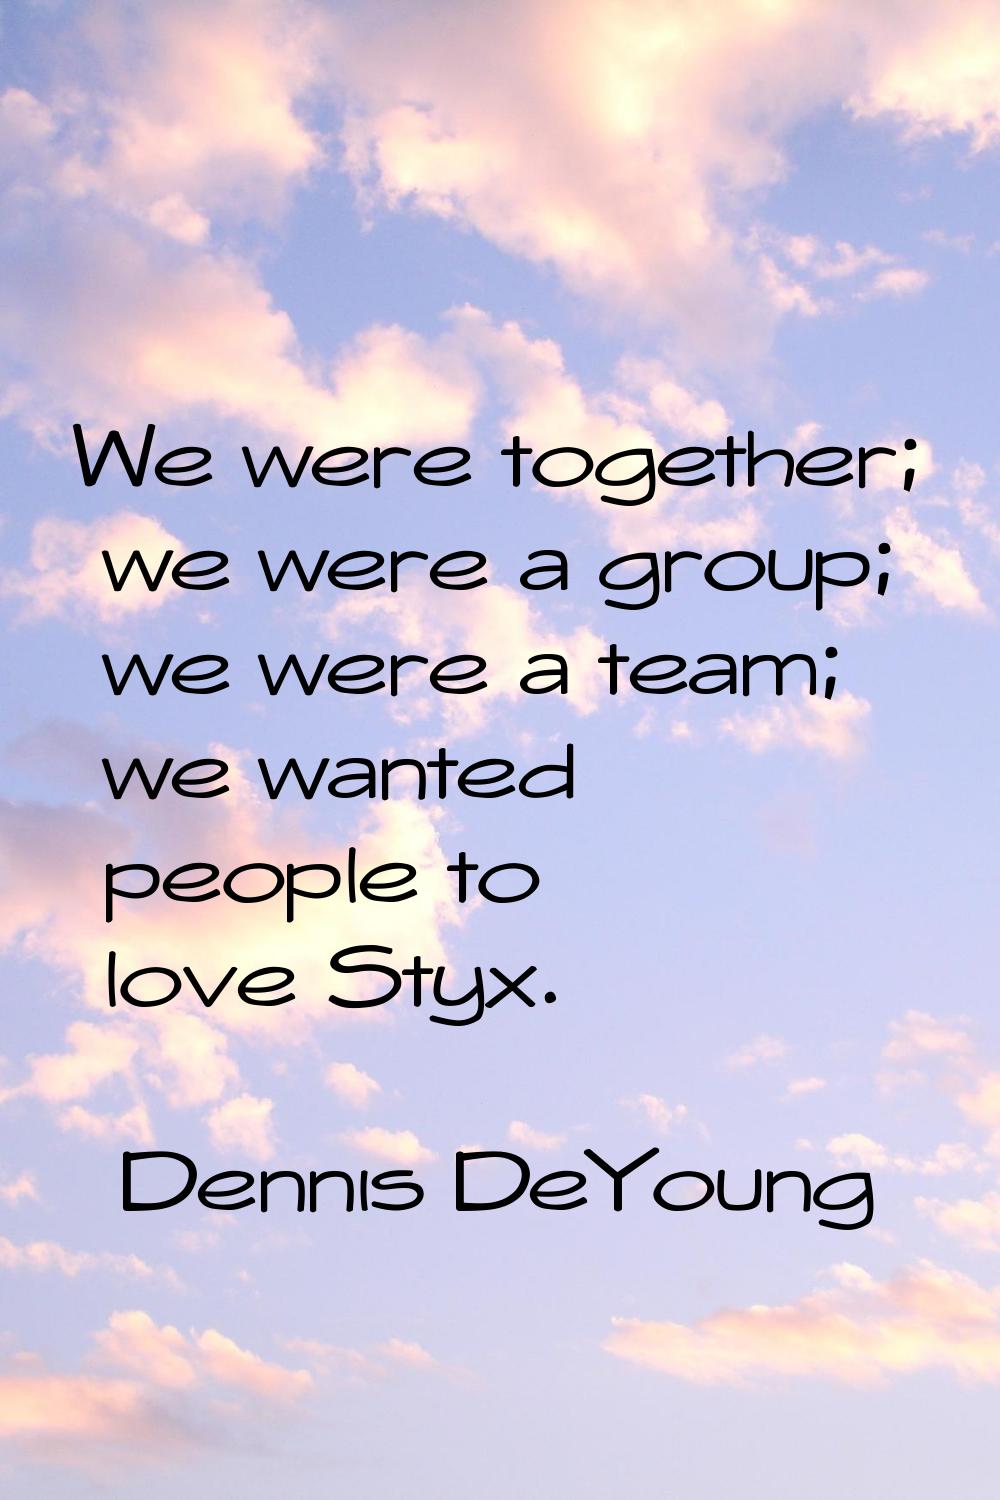 We were together; we were a group; we were a team; we wanted people to love Styx.